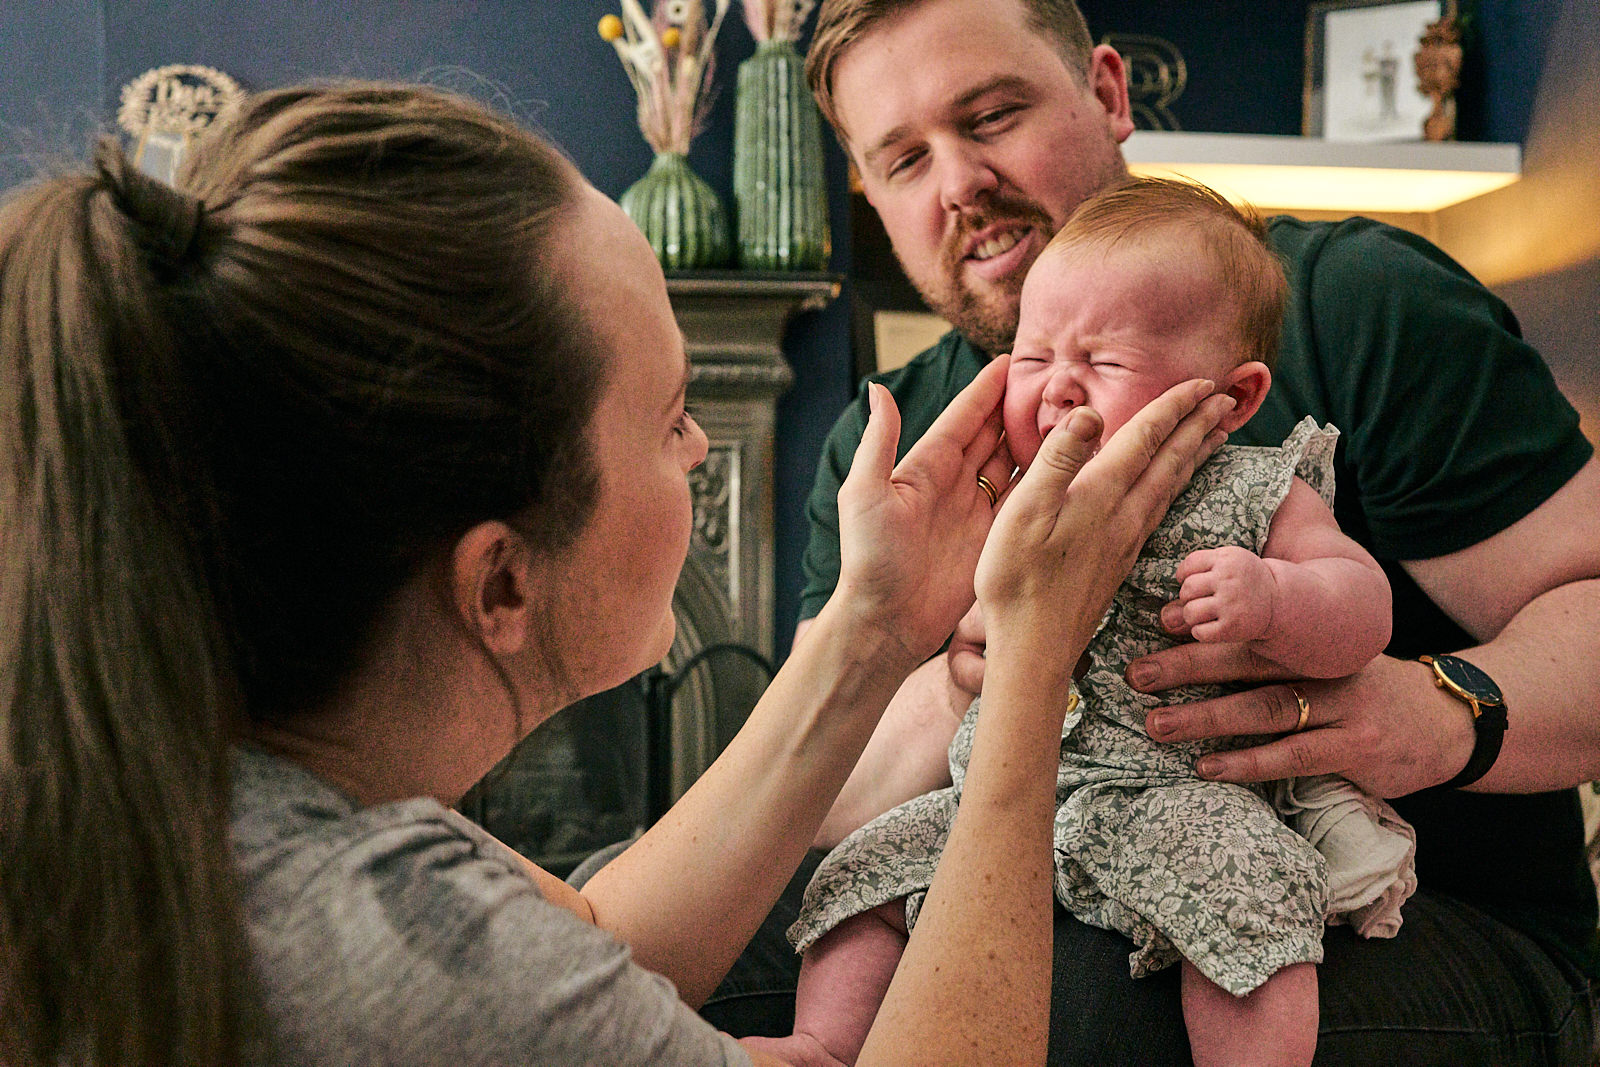 parents try to calm crying baby down for photoshoot